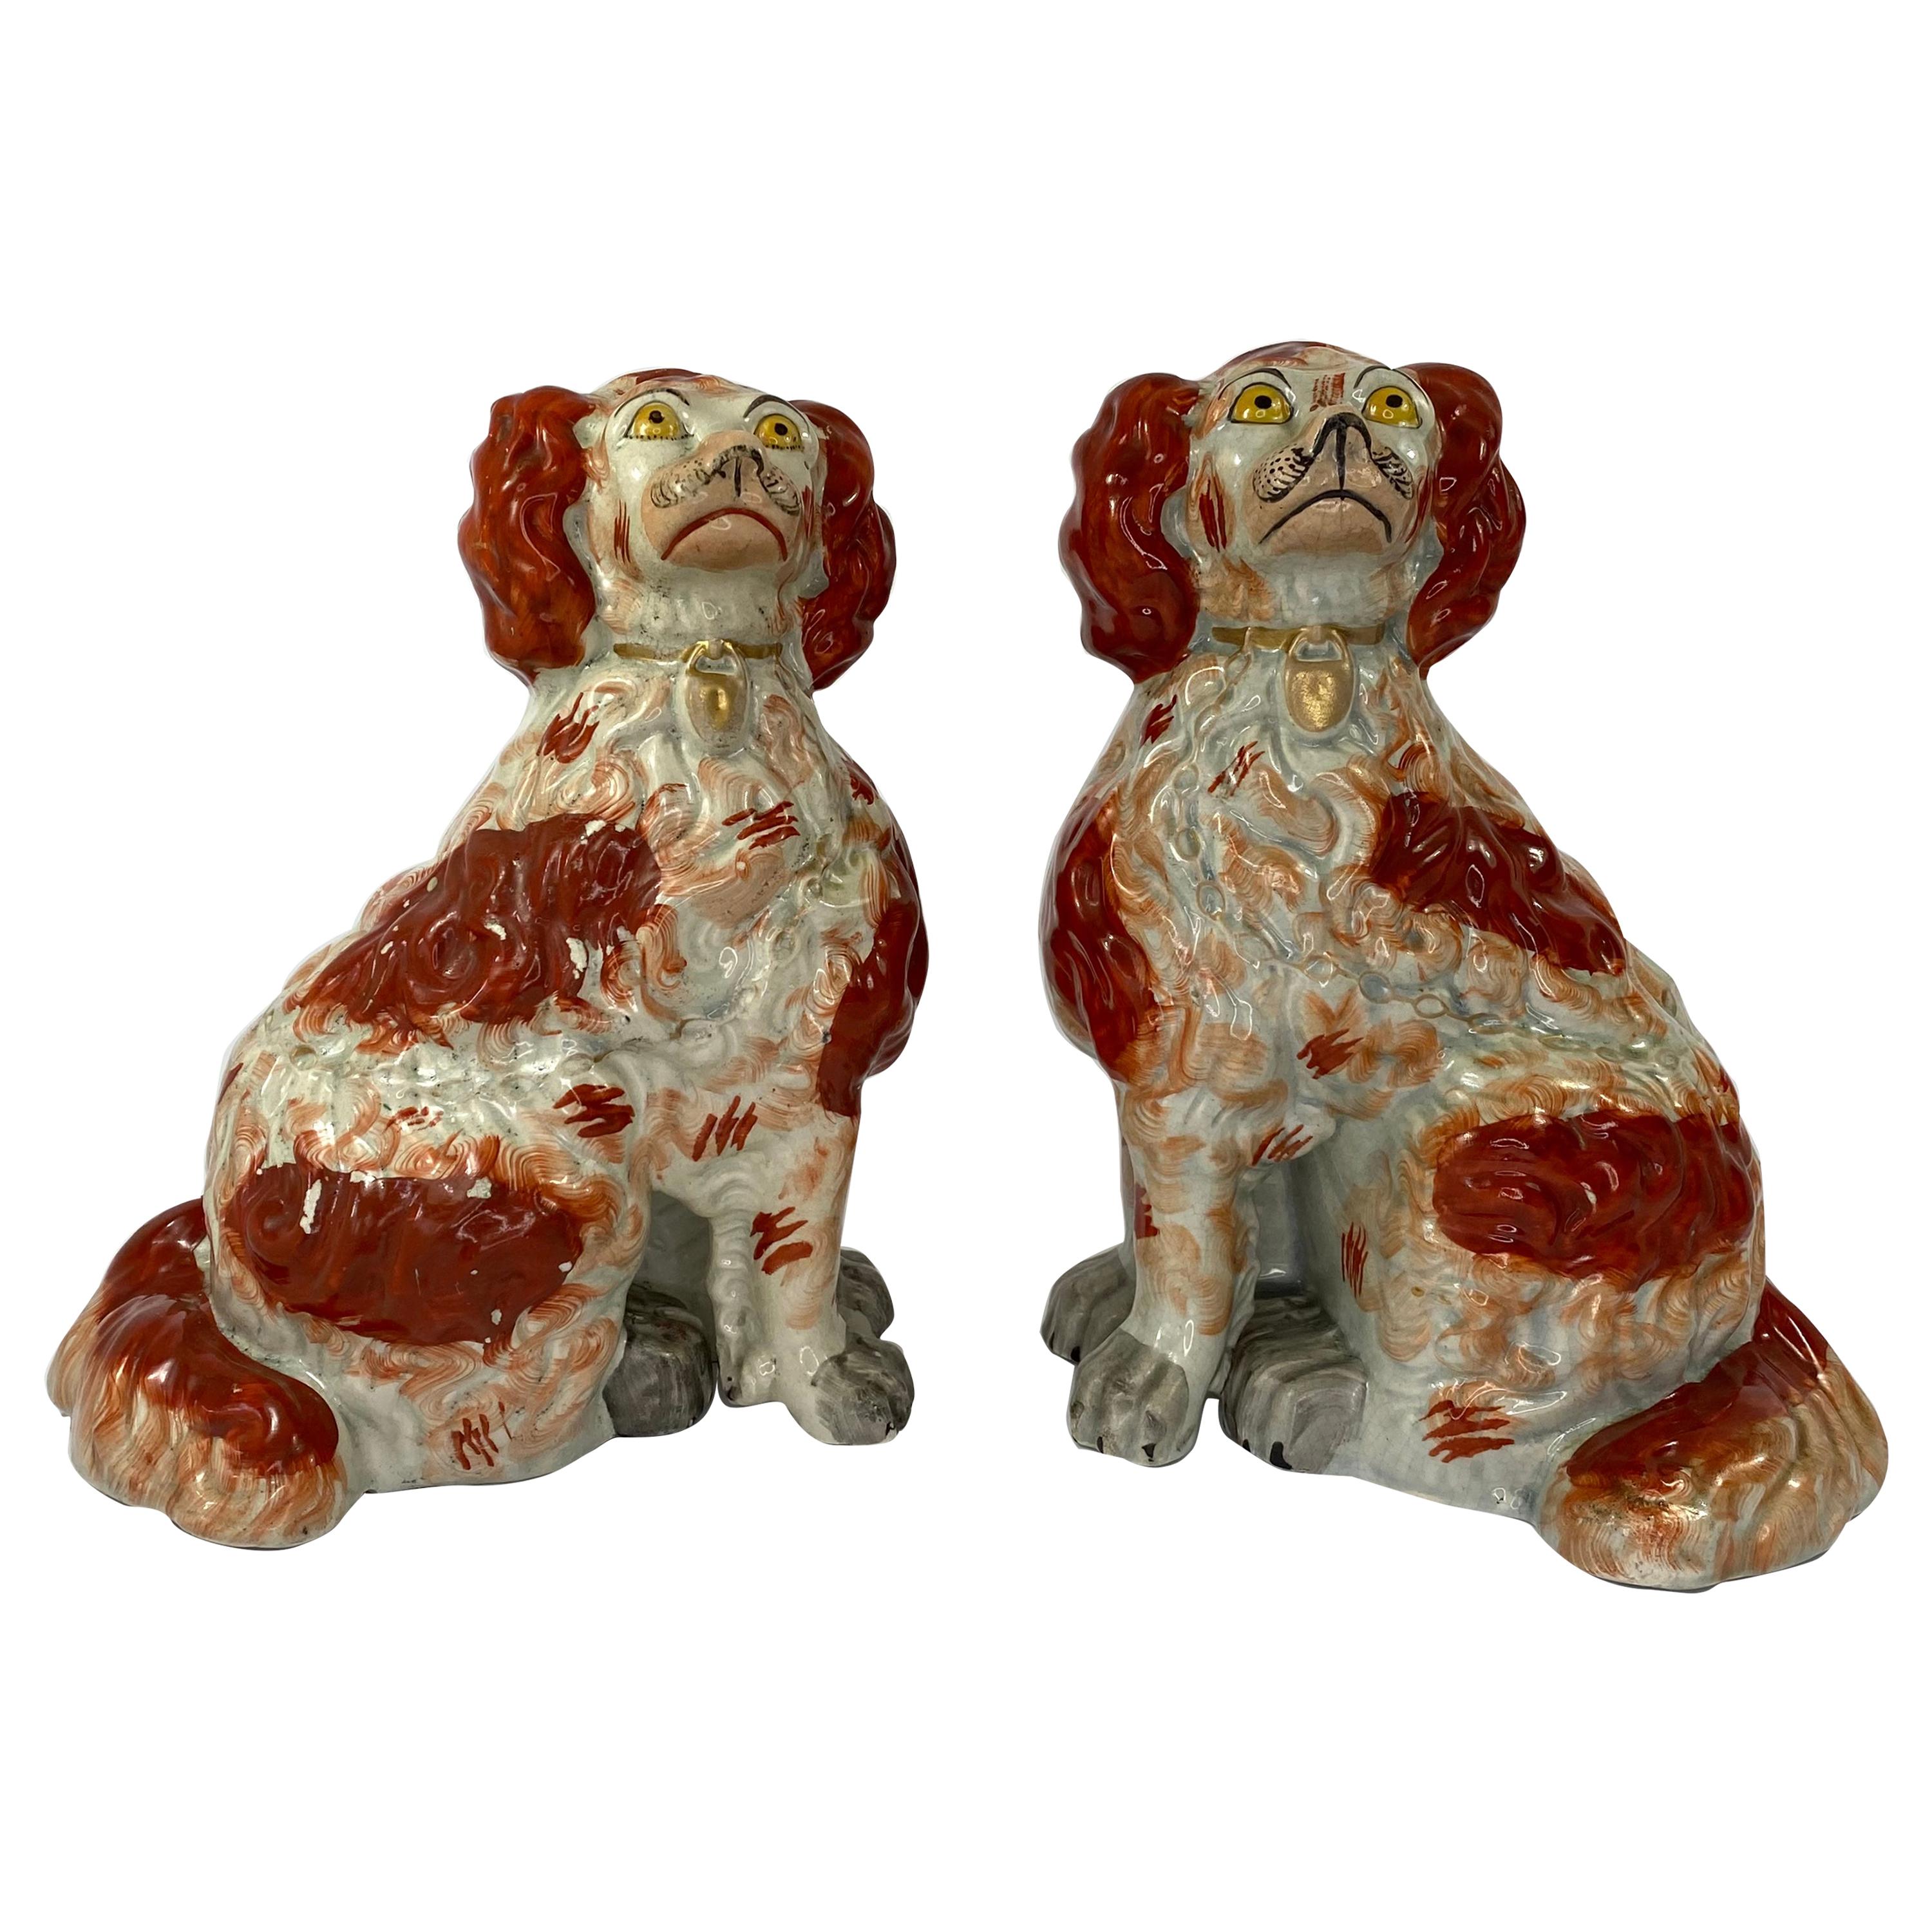 Fine and Rare Pair of Large Staffordshire Spaniels, c. 1840